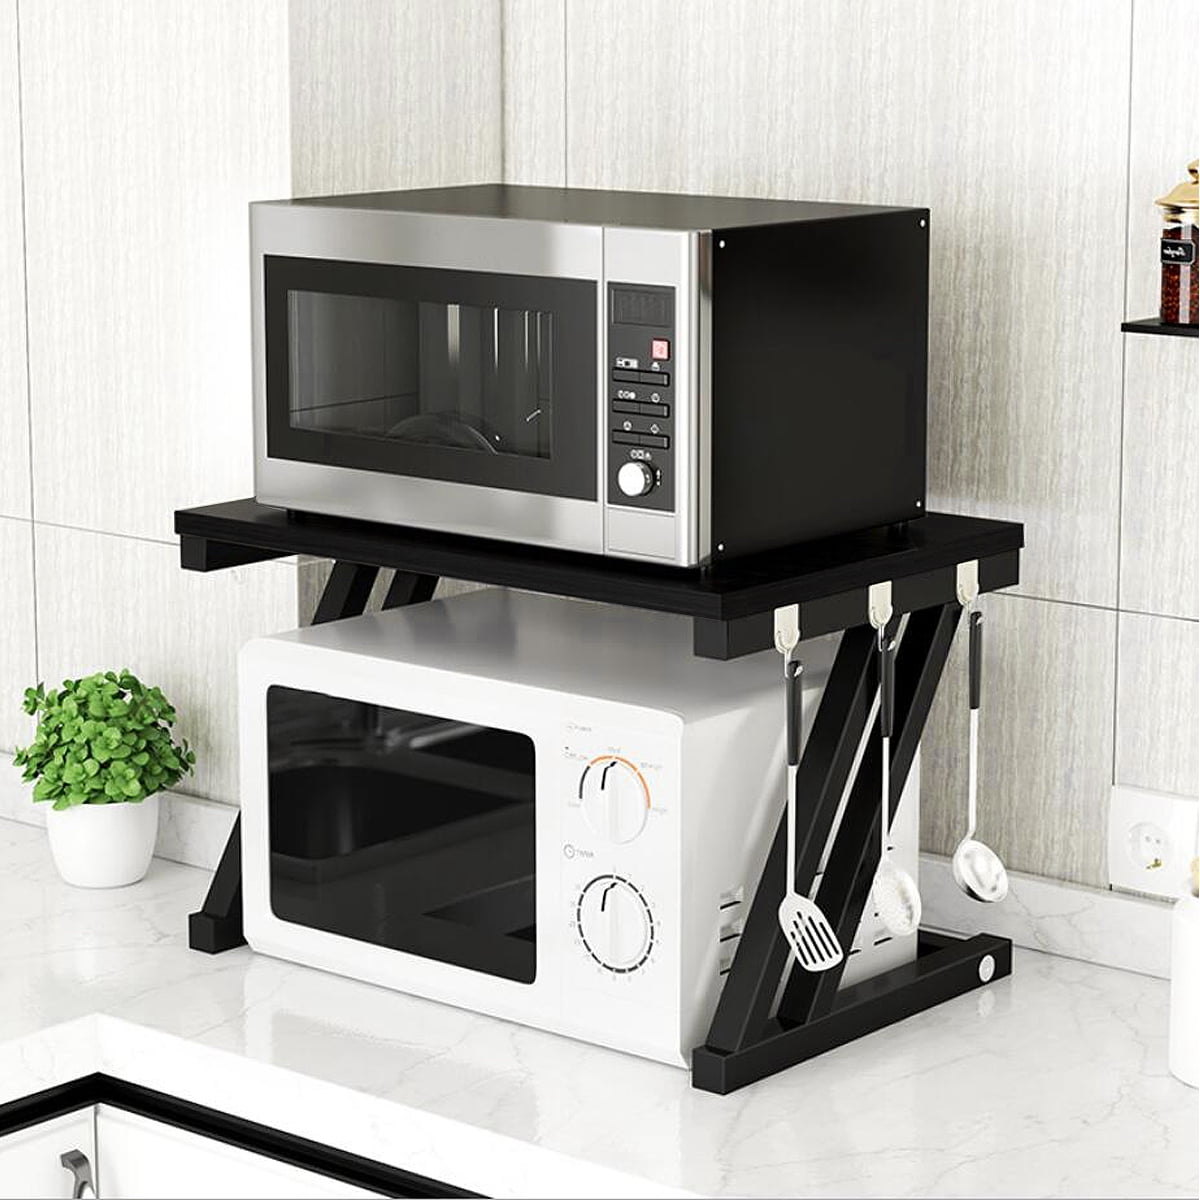 2 Tier Steel Wooden Home Kitchen Microwave Stand Microwave Oven Rack